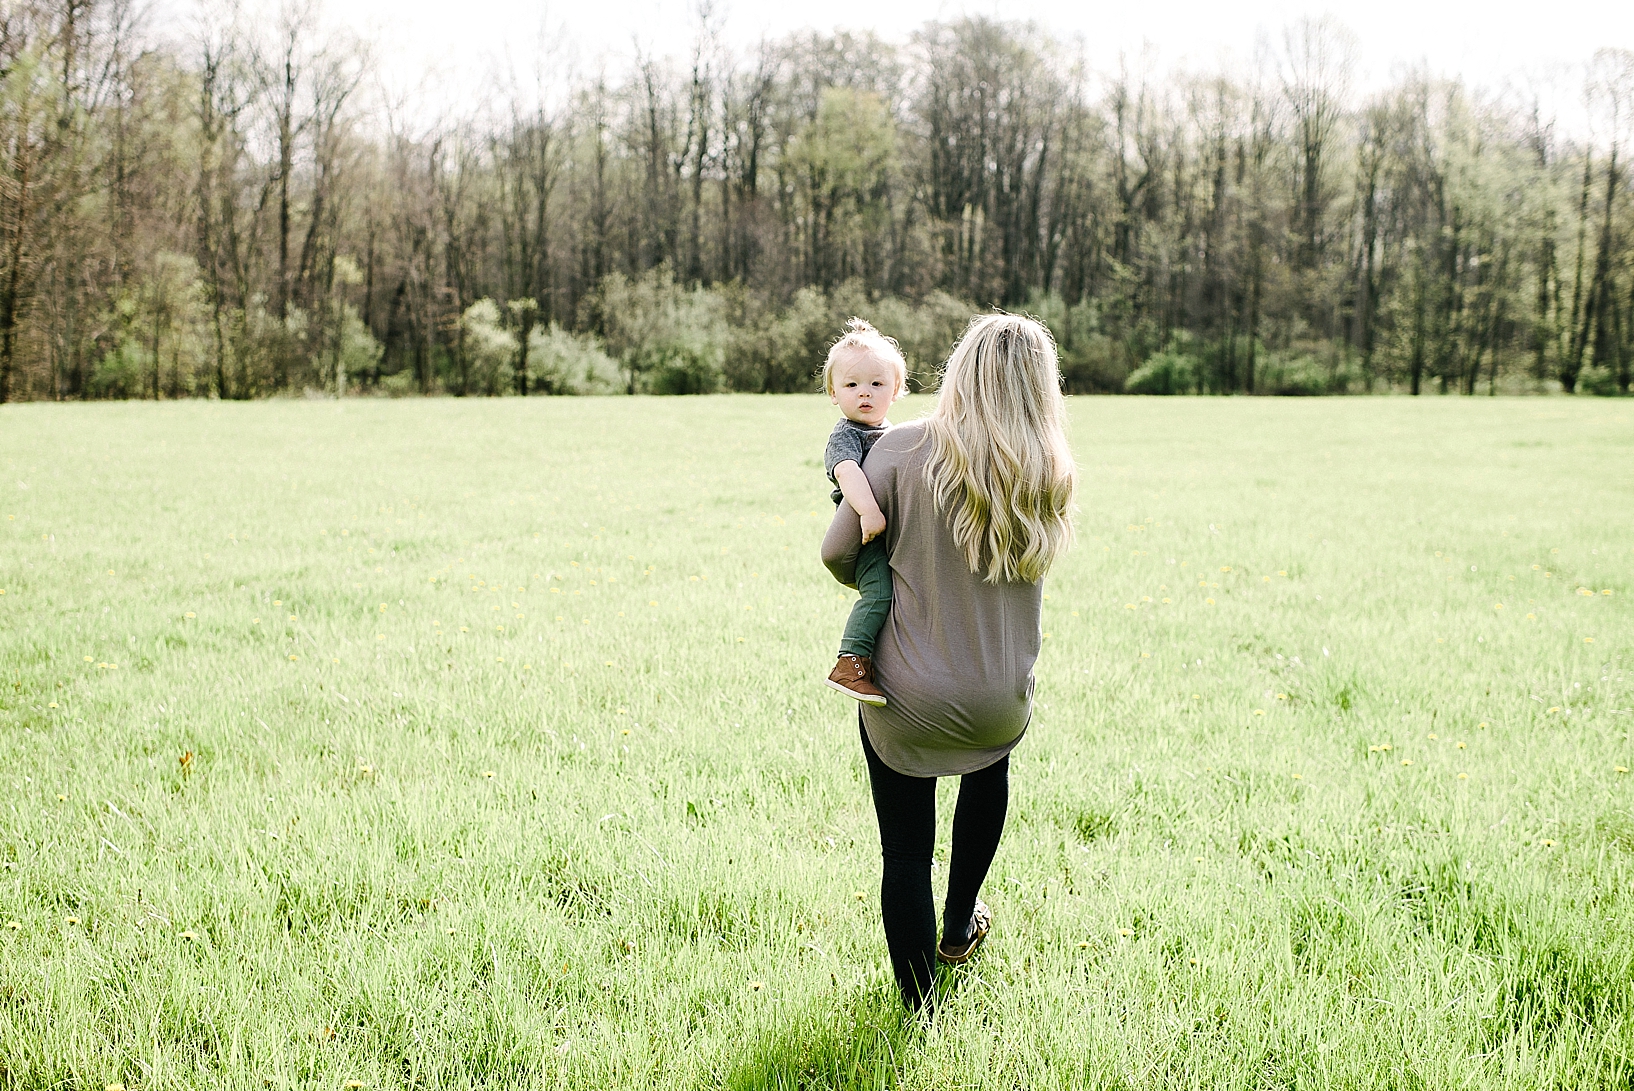 toddler boy with man bun walking across open field being carried by mother with long blonde hair